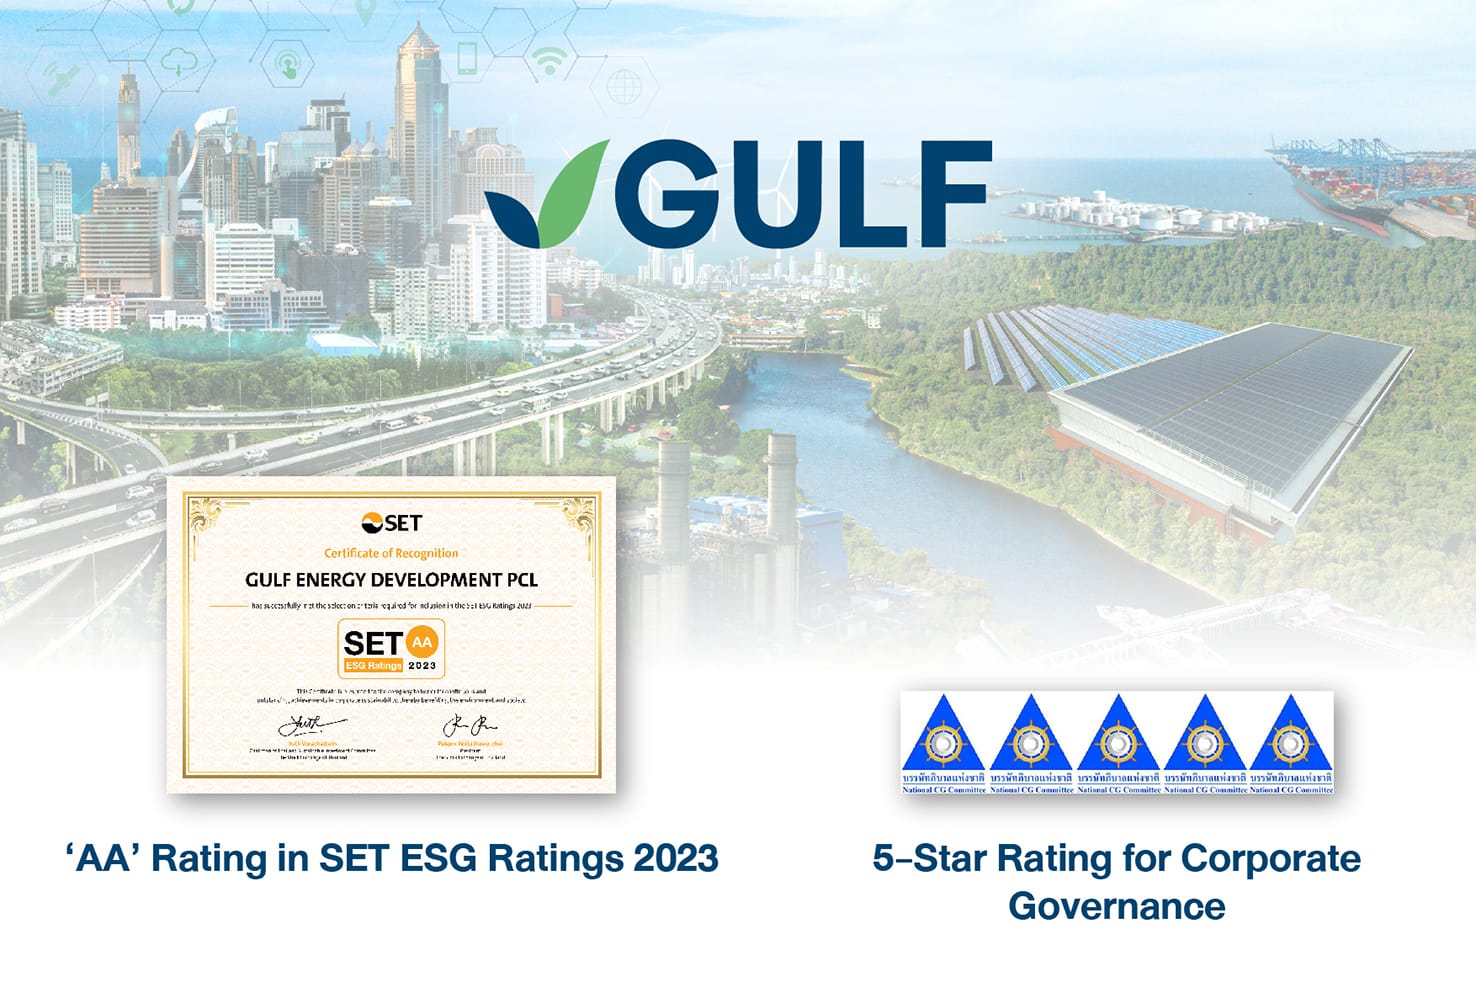 Gulf Secures AA Rating in SET ESG Ratings 2023